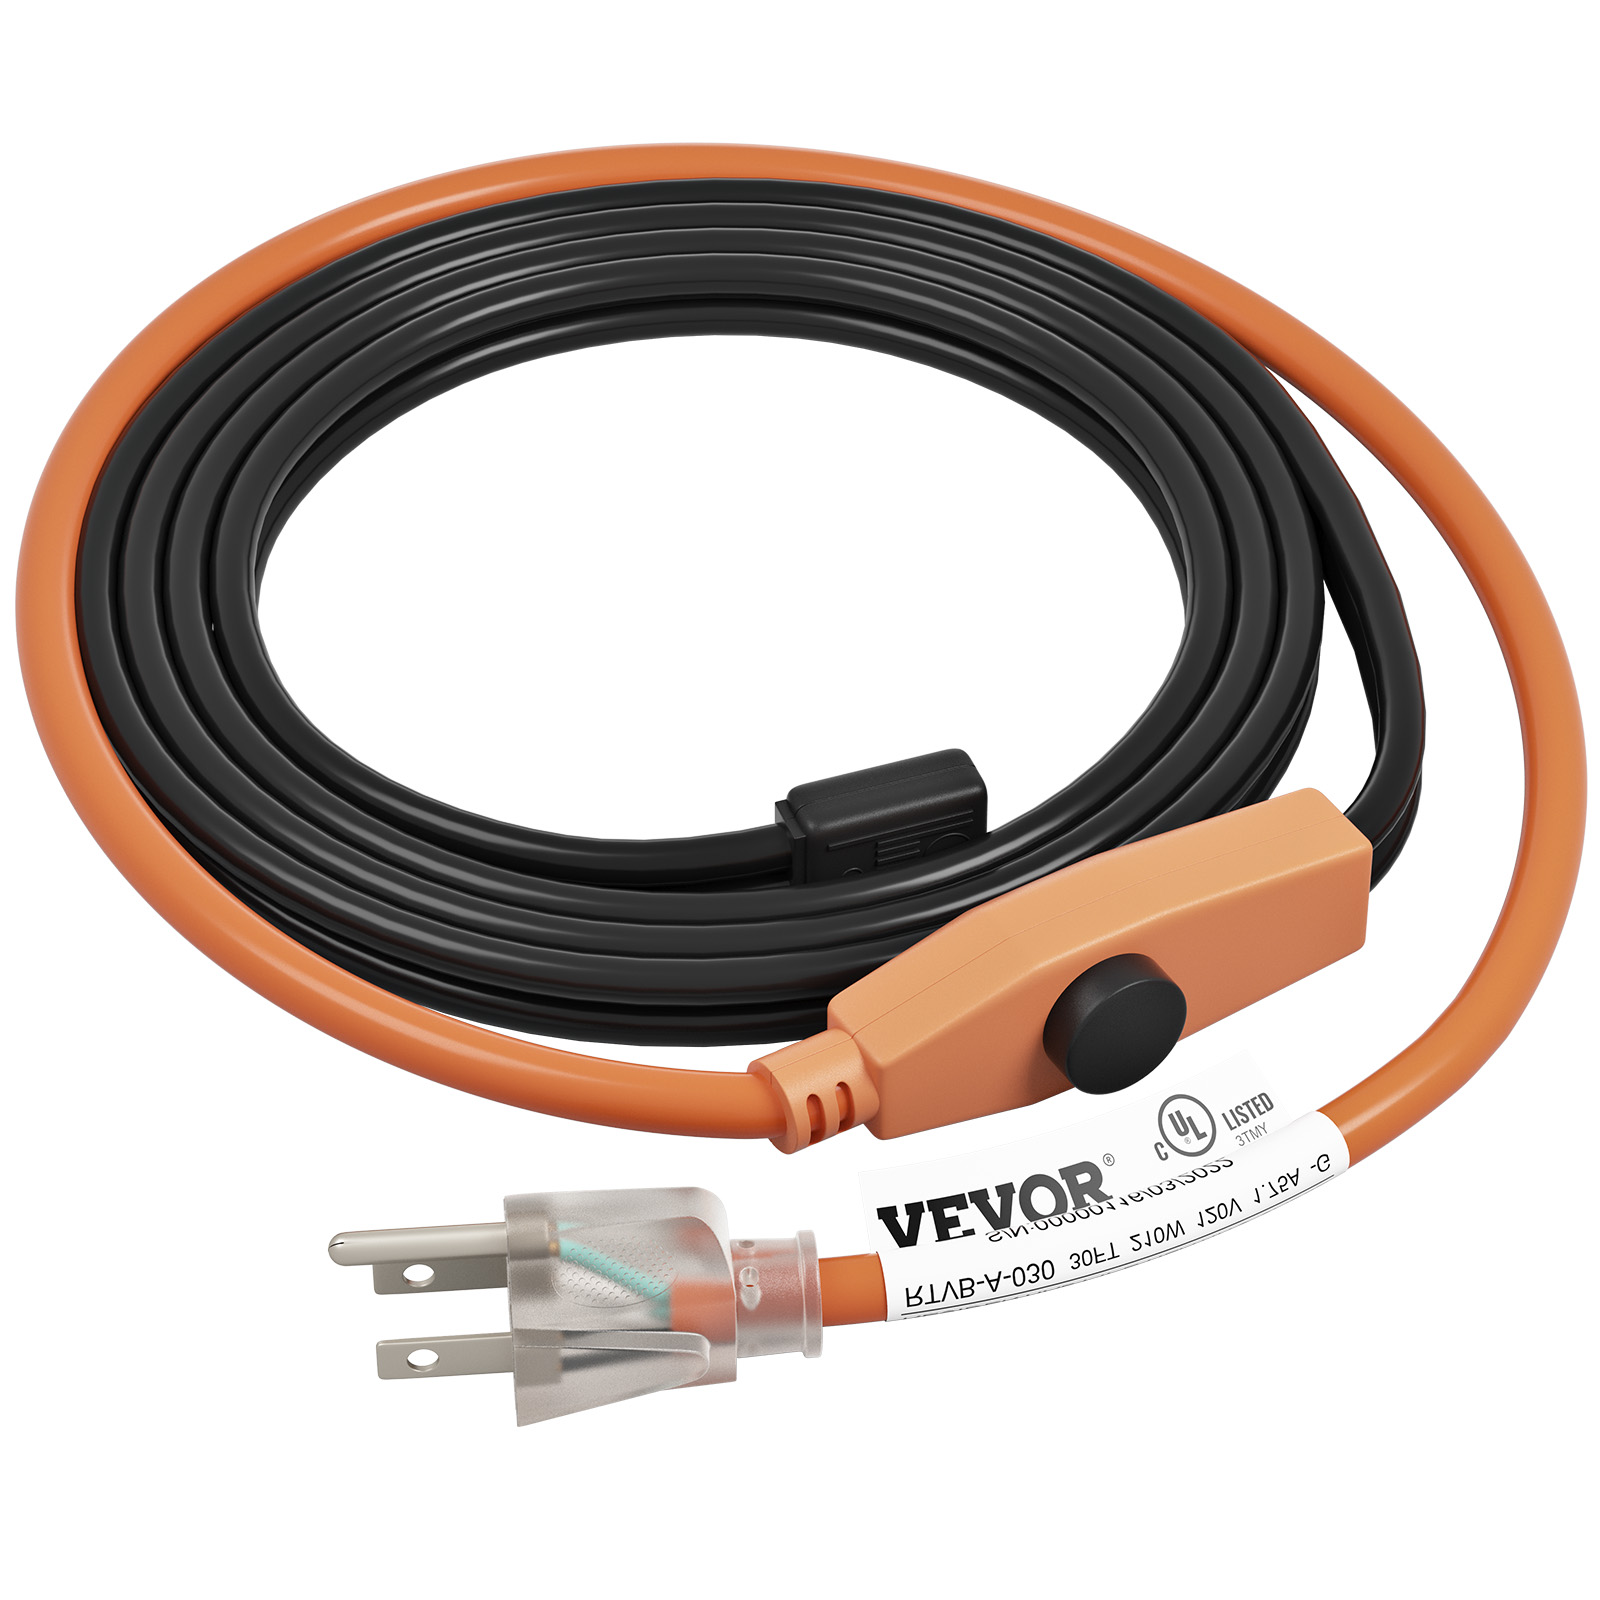 VEVOR Self-Regulating Pipe Heating Cable, 60-feet 5W/ft Heat Tape for Pipes  Freeze Protection, Protects PVC Hose, Metal and Plastic Pipe from Freezing,  120V